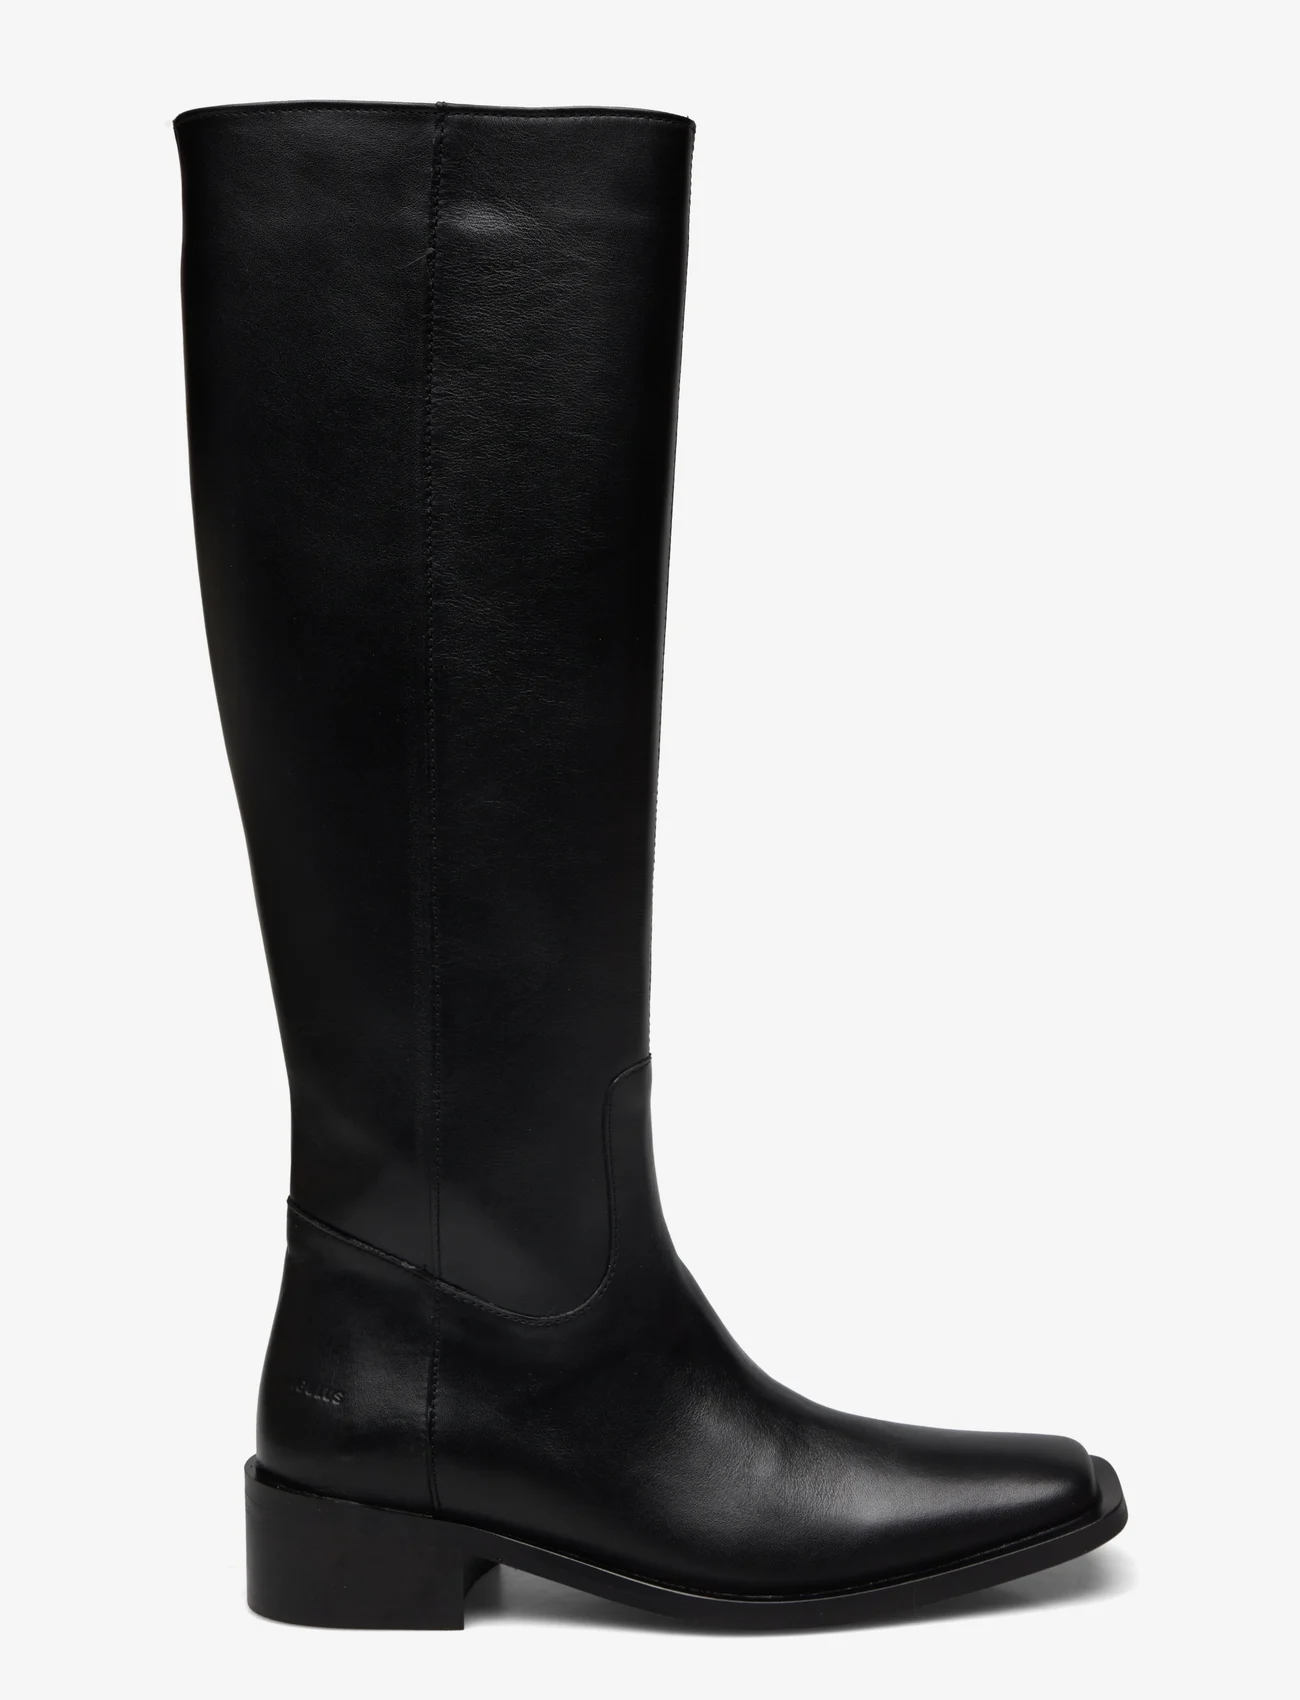 ANGULUS - Booties - flat - with zipper - knee high boots - 1604 black - 1